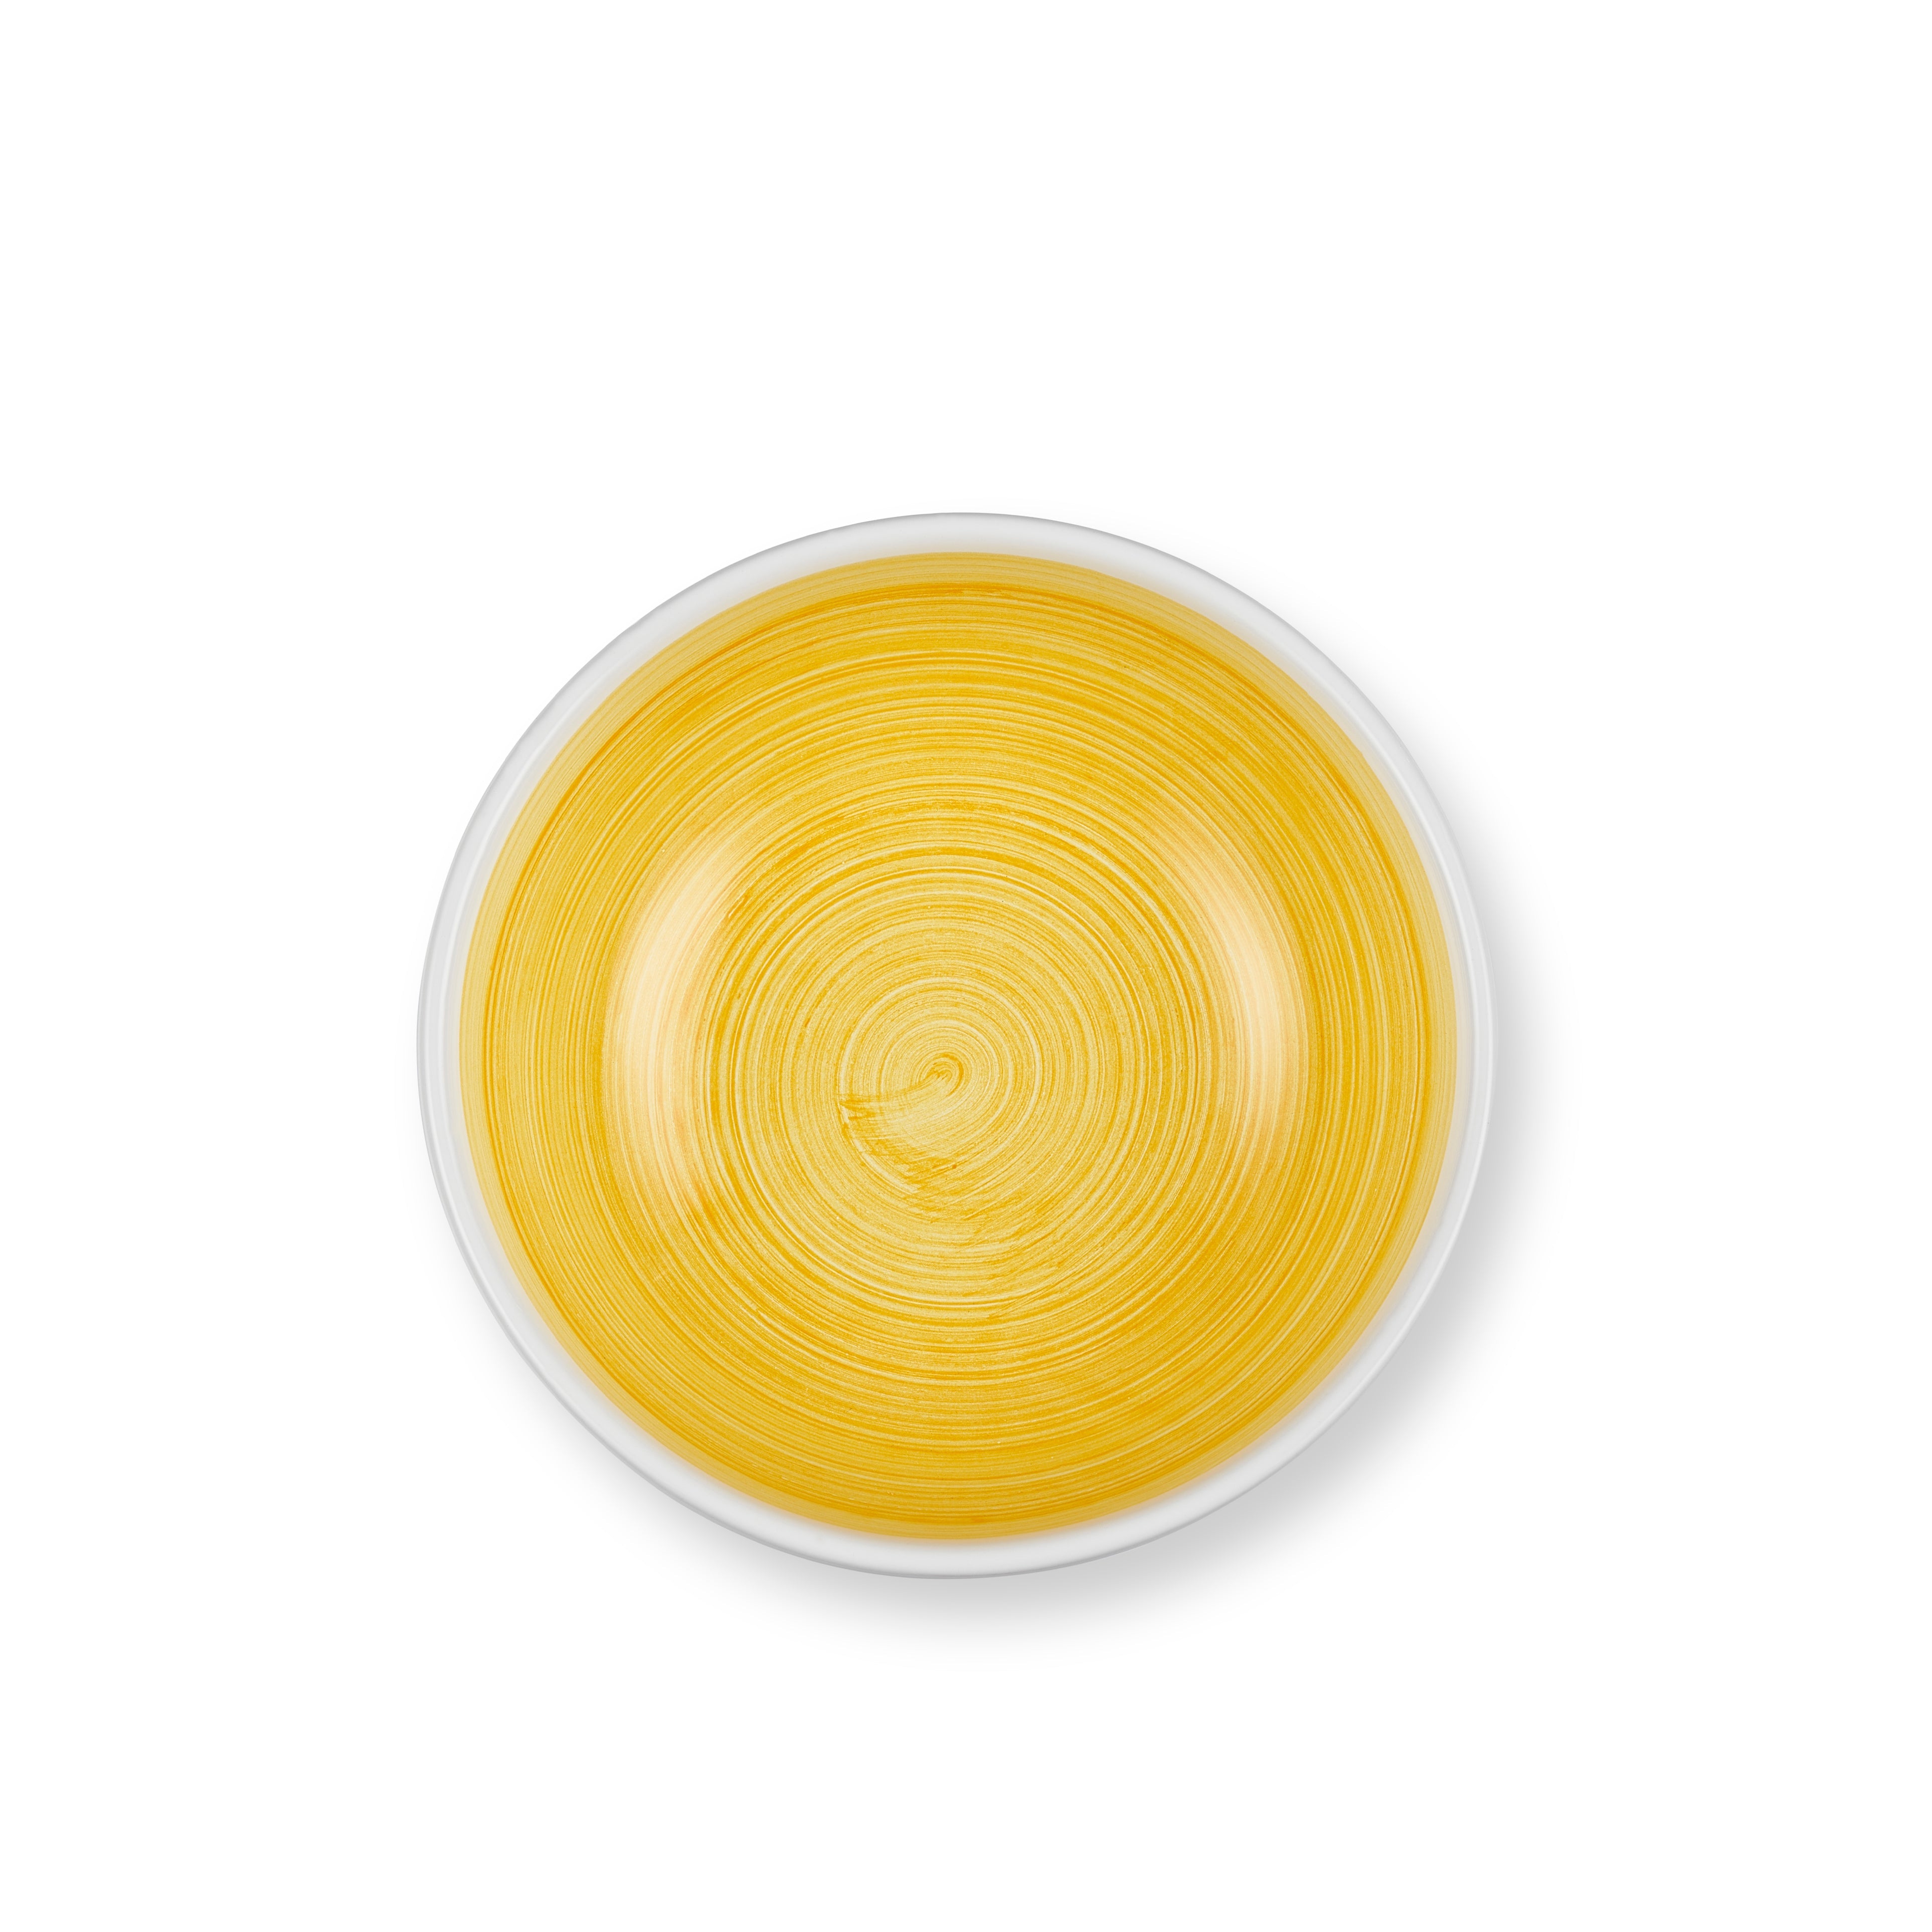 S&B 'Brushed' Ceramic Soup Bowl in Yellow, 16cm